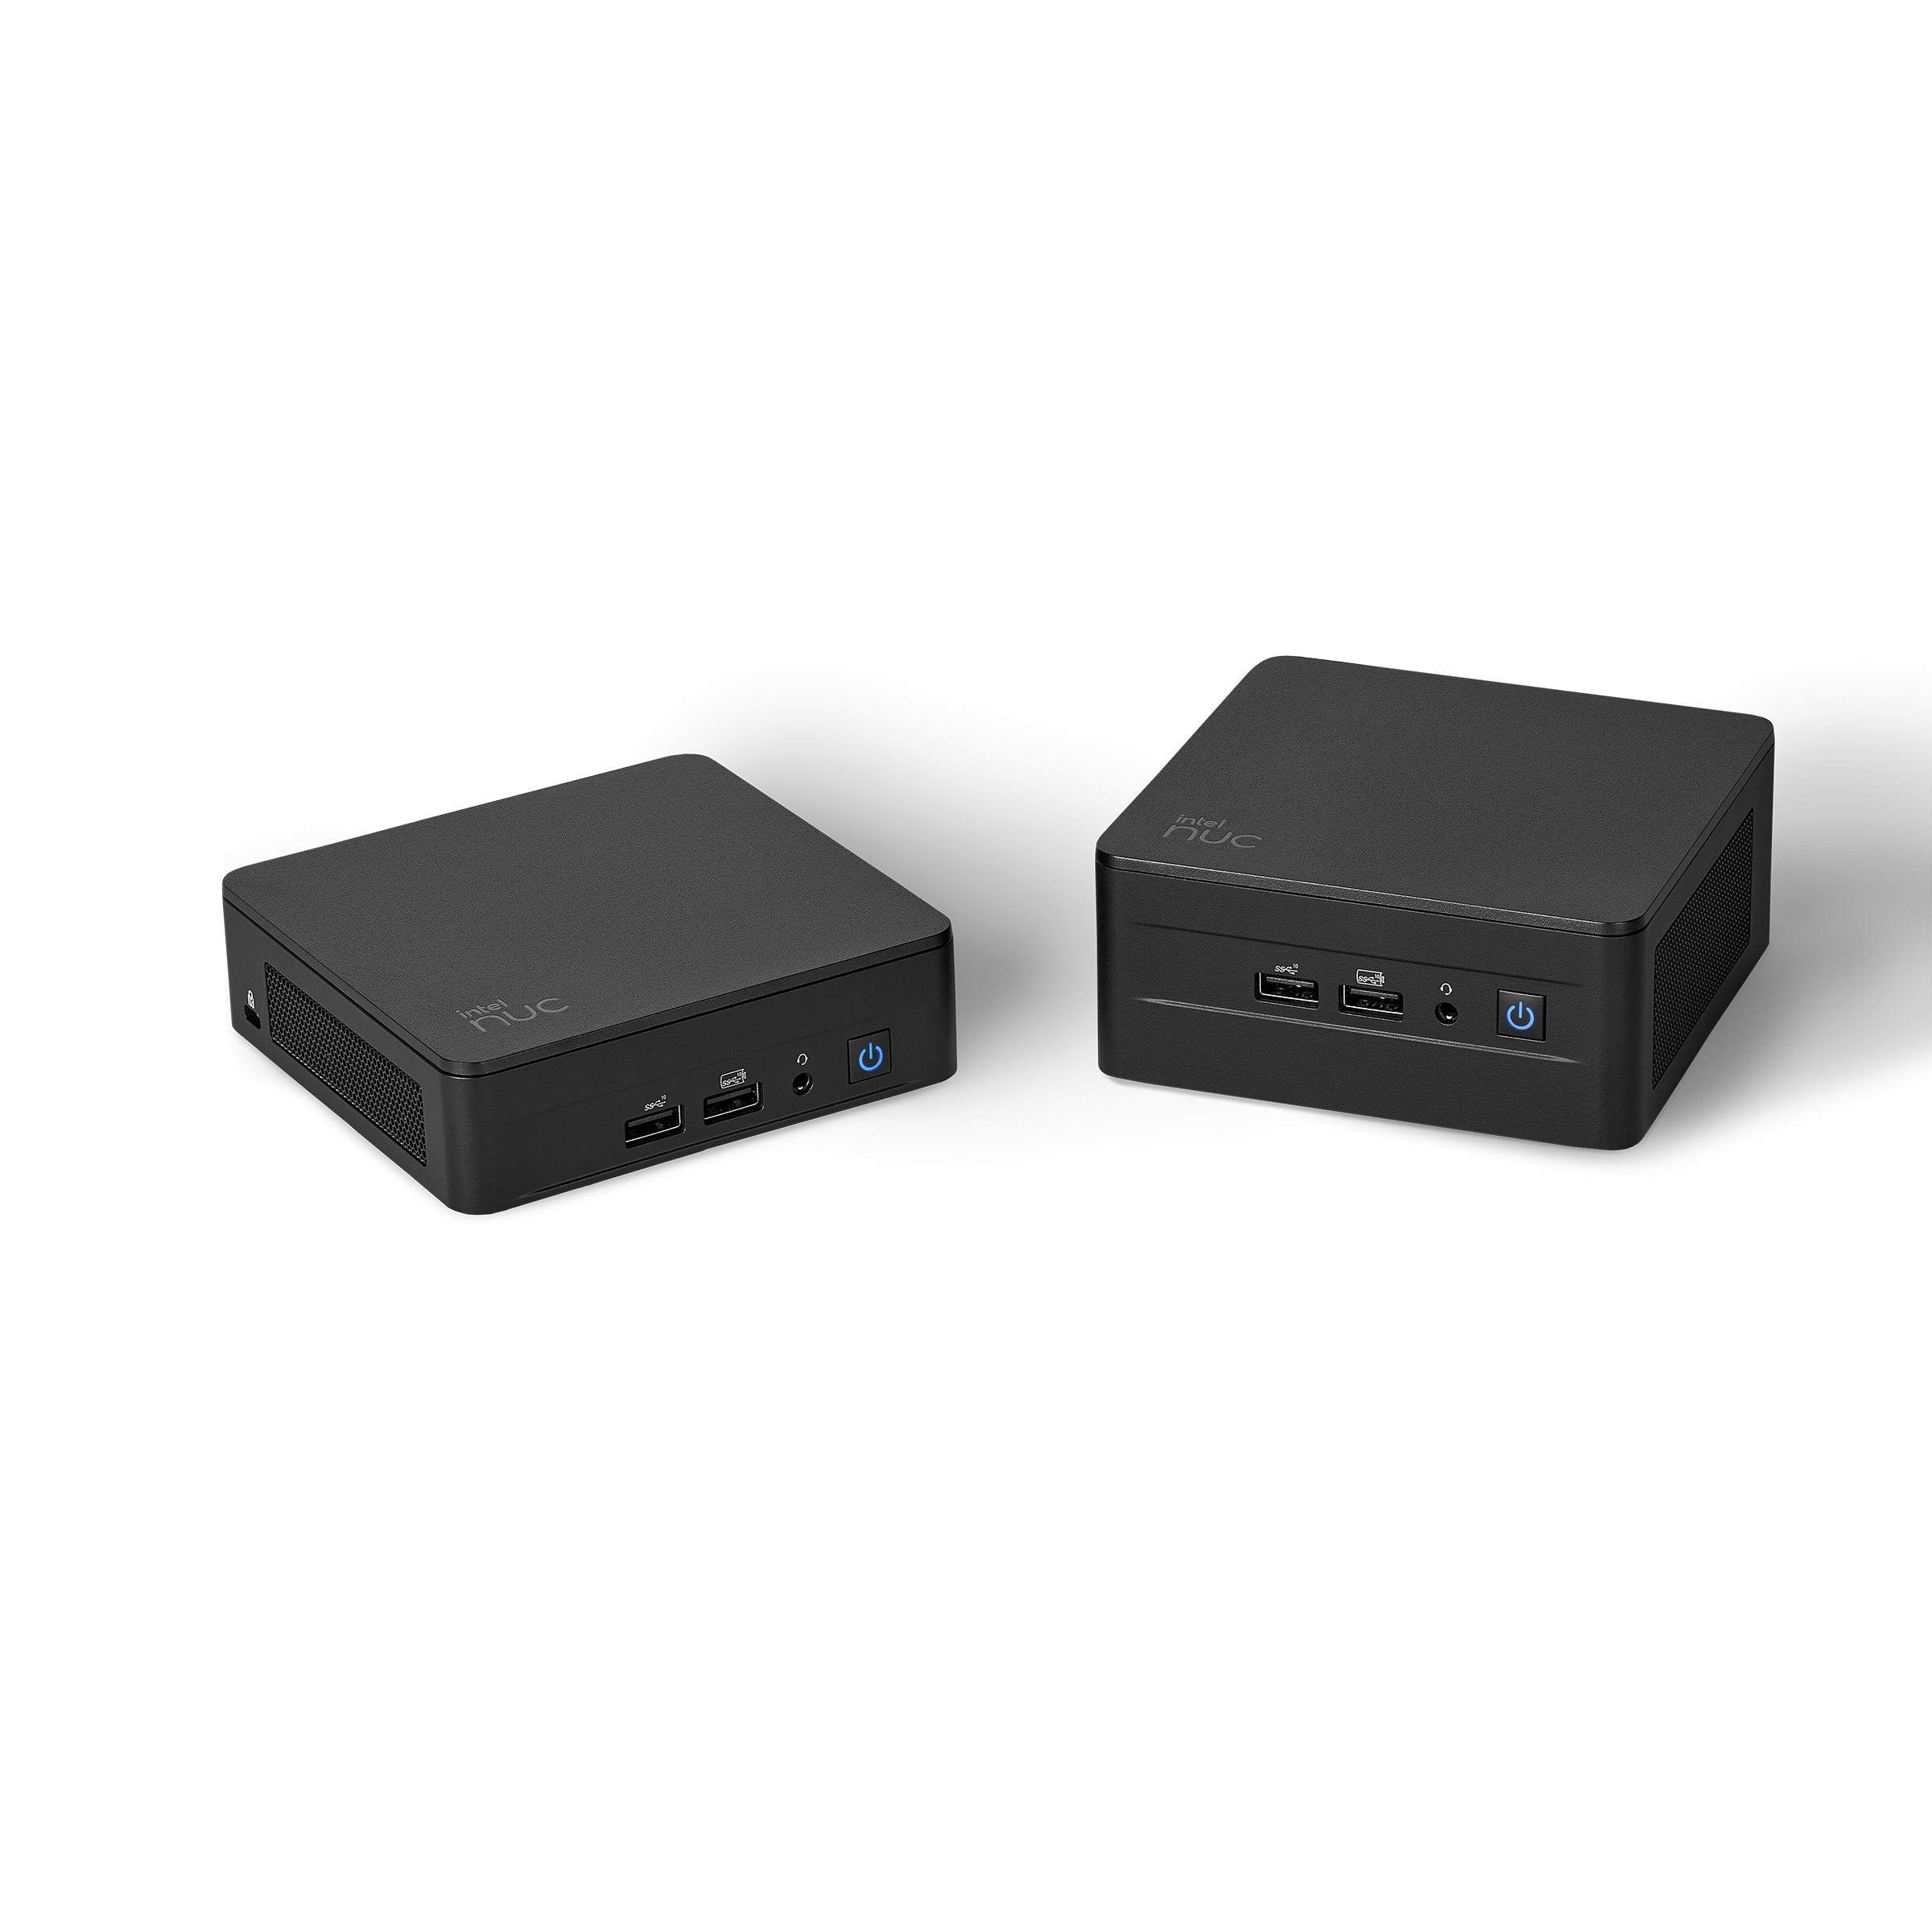 Asus Will Take Over NUC Business From Intel